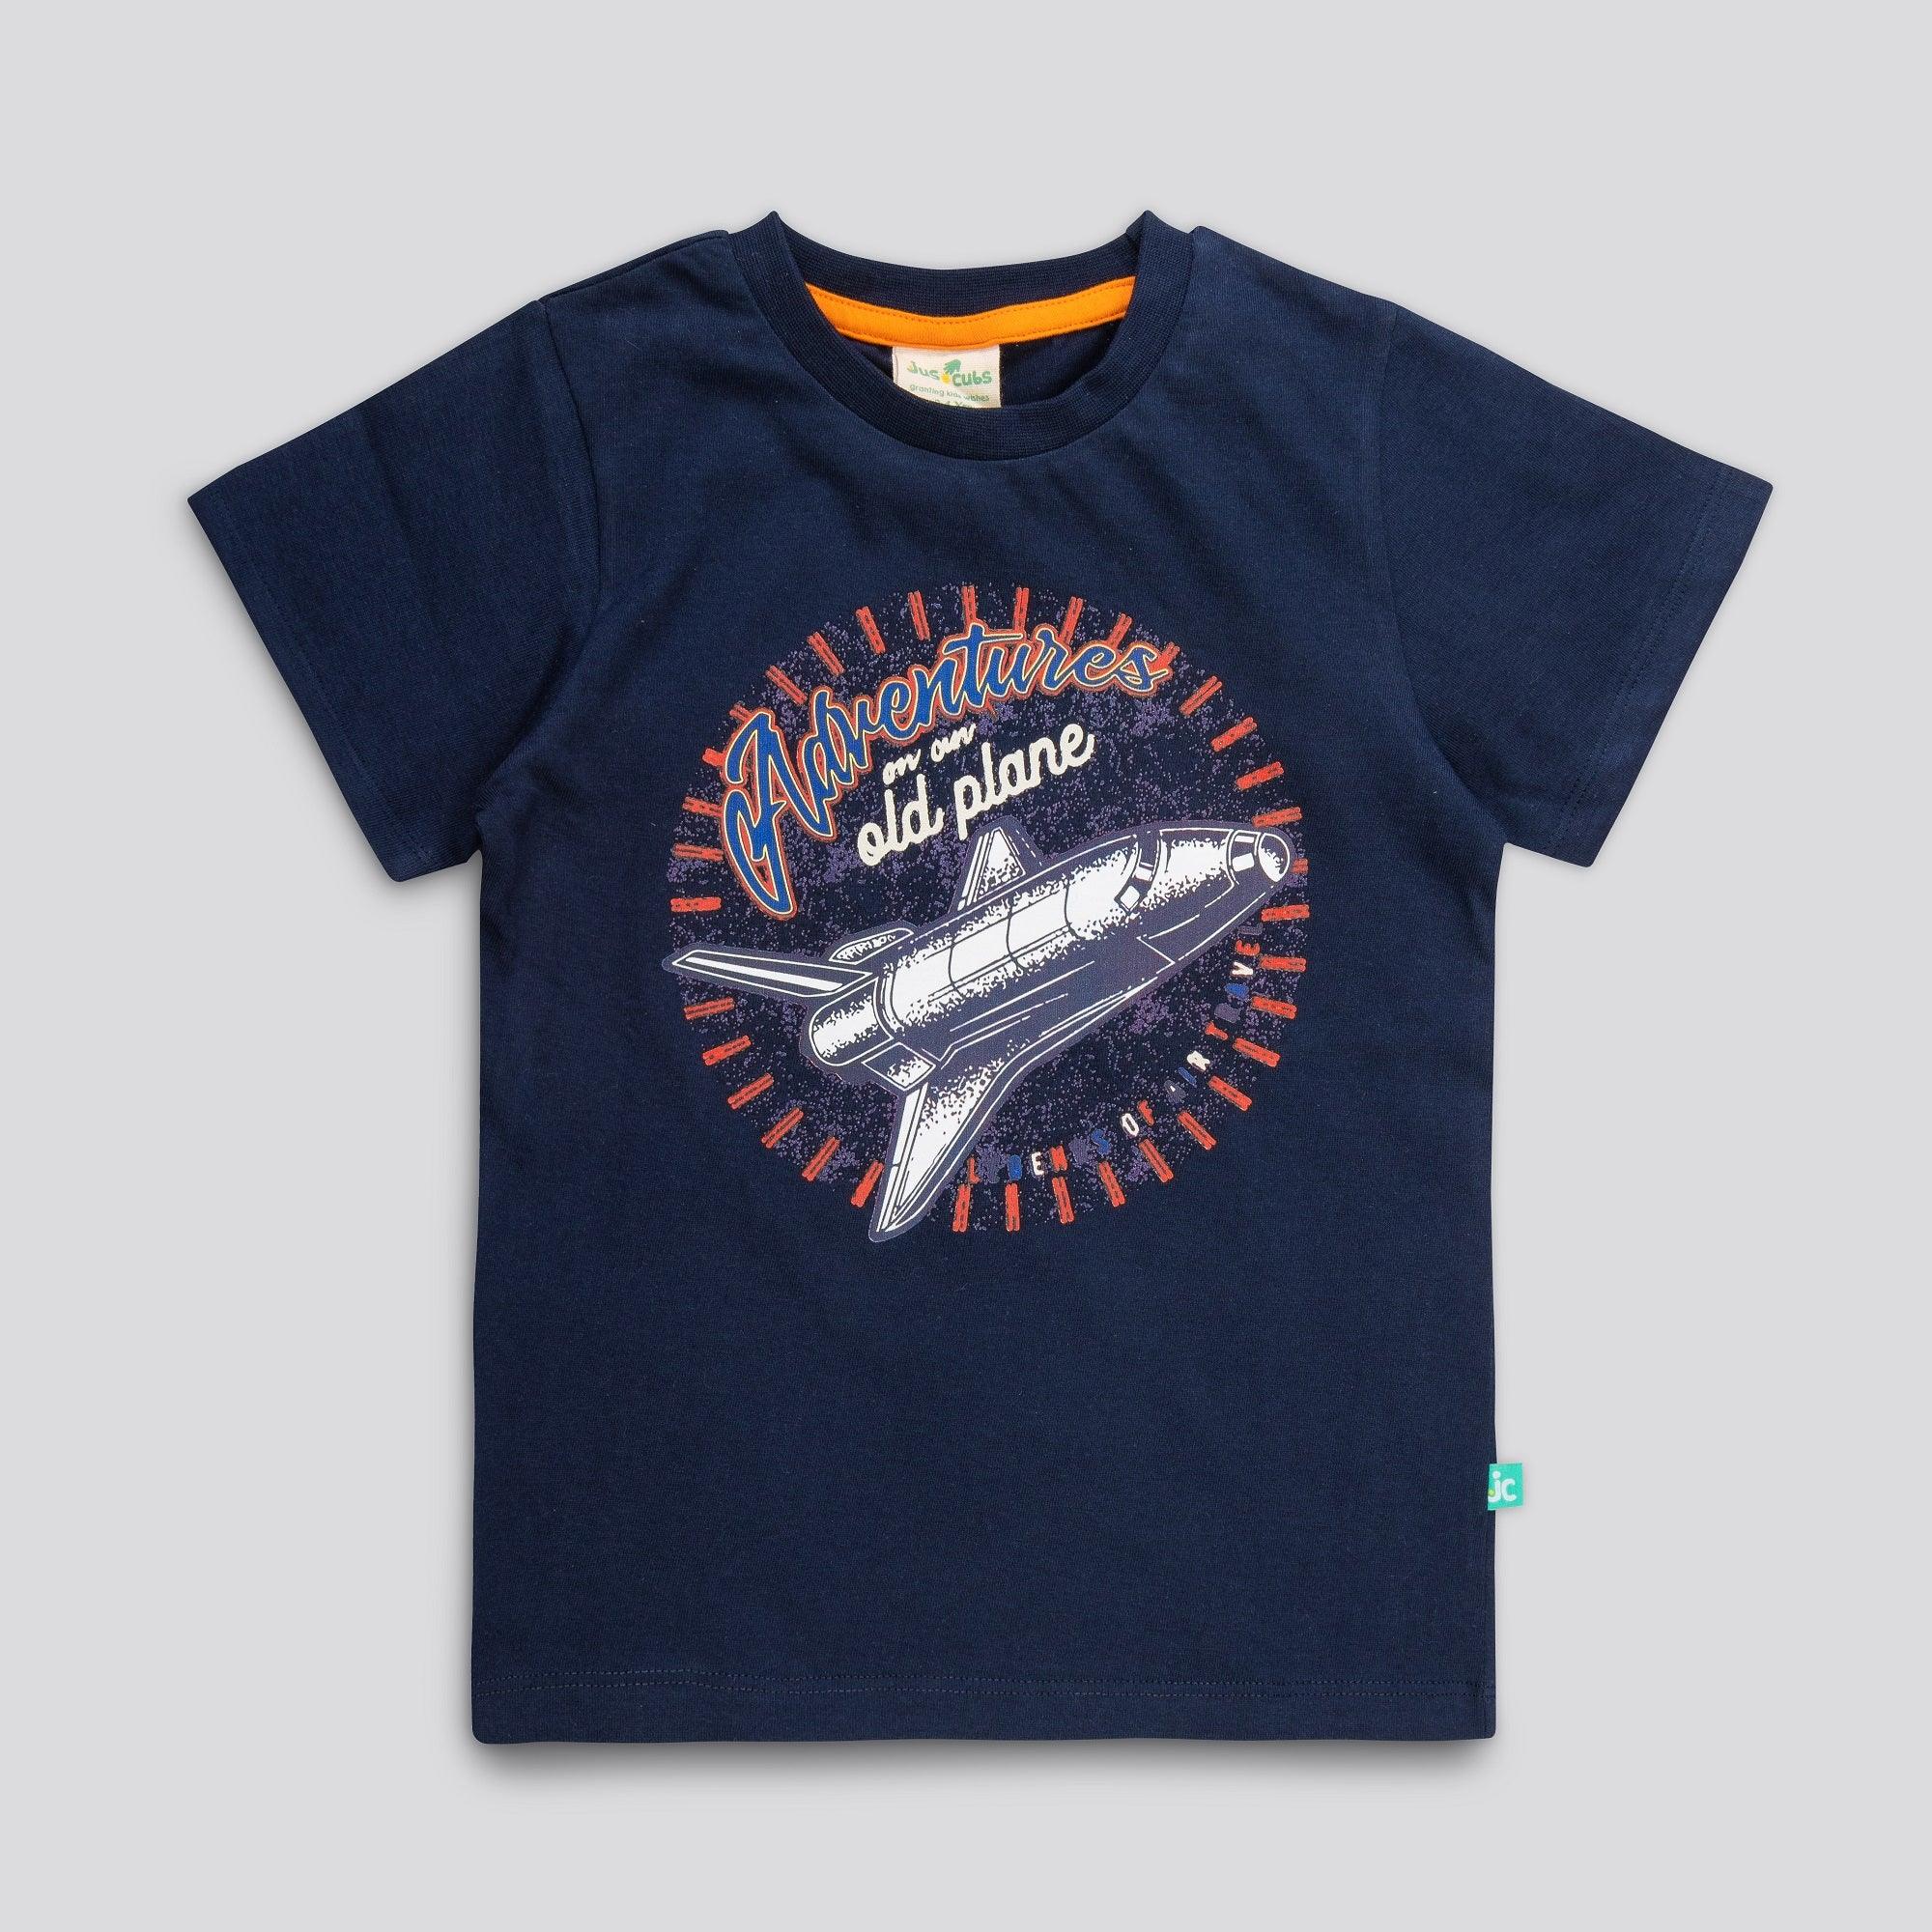 YOUNG BOYS ADVENTURE GRAPHIC PRINTED T SHIRT - Juscubs